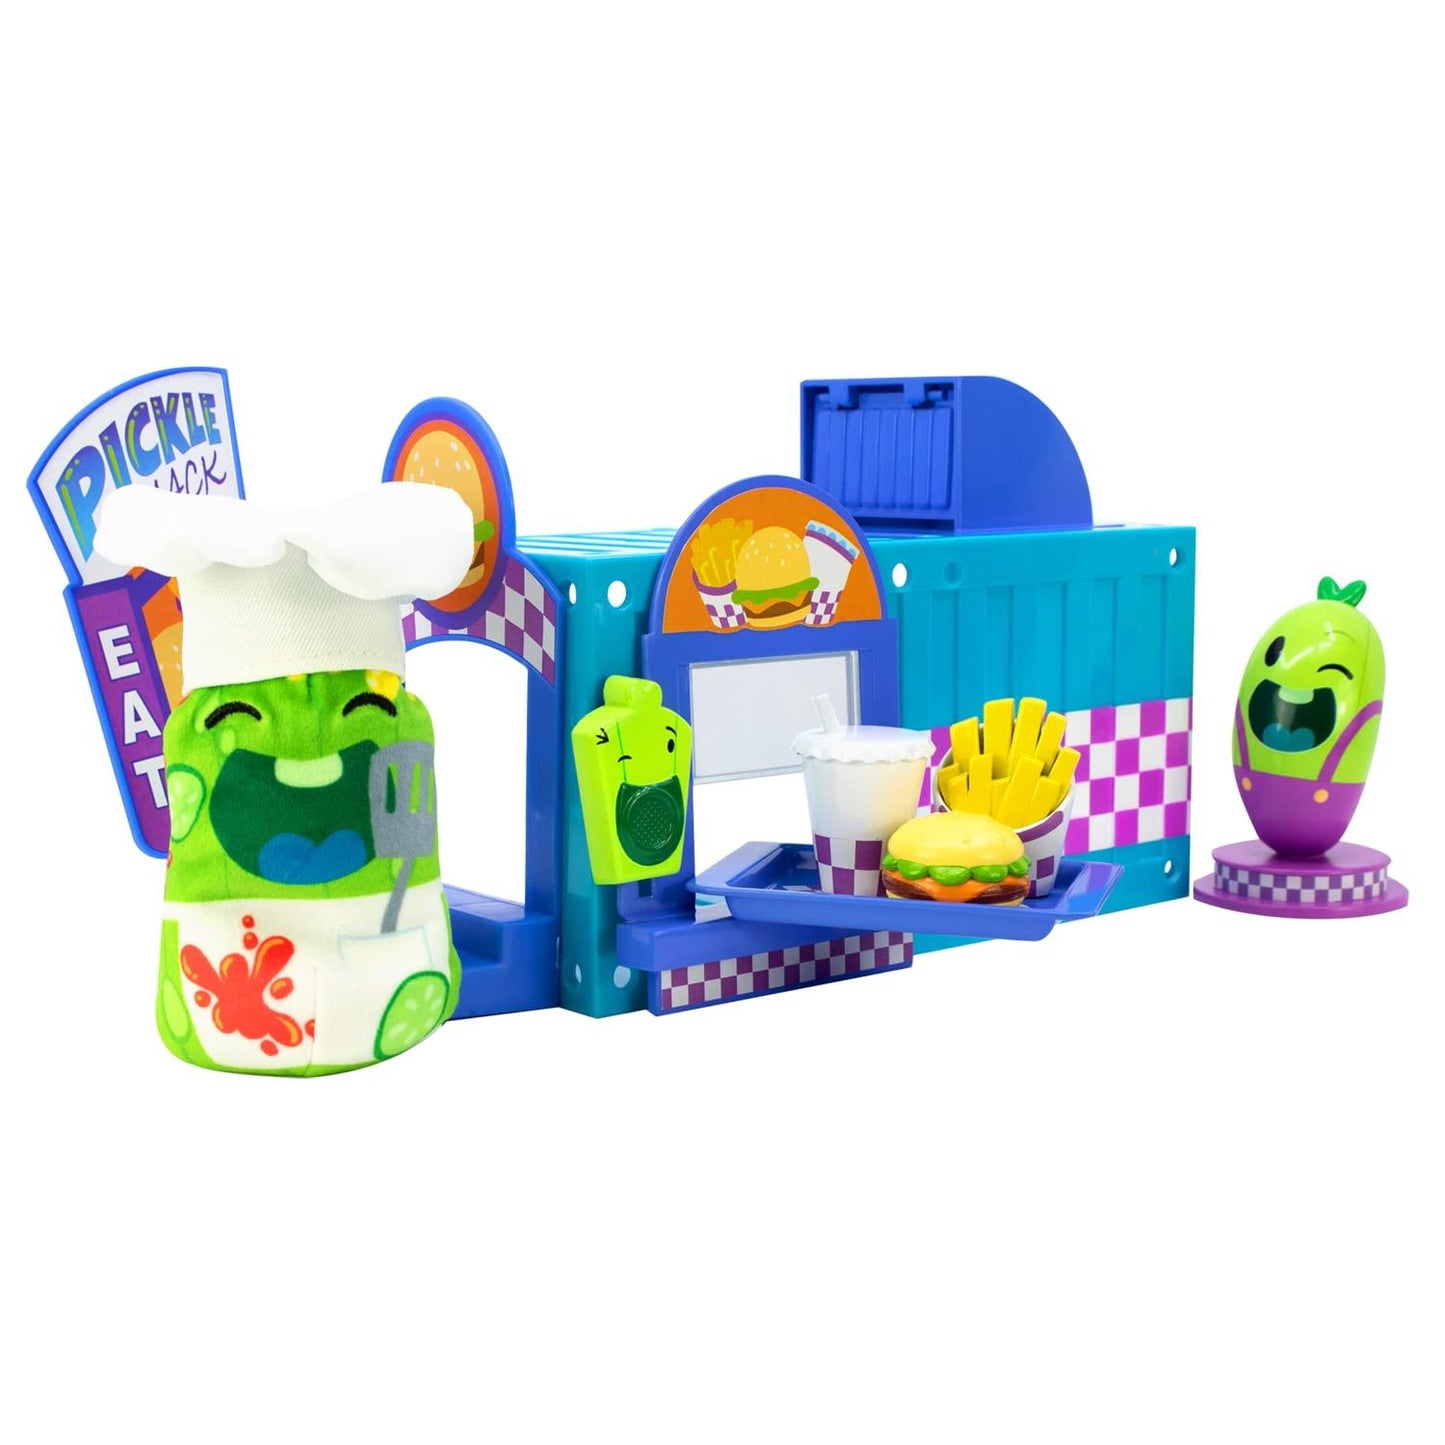 Cats Vs Pickles Shack Playset With Exclusive Pickle and Accessories